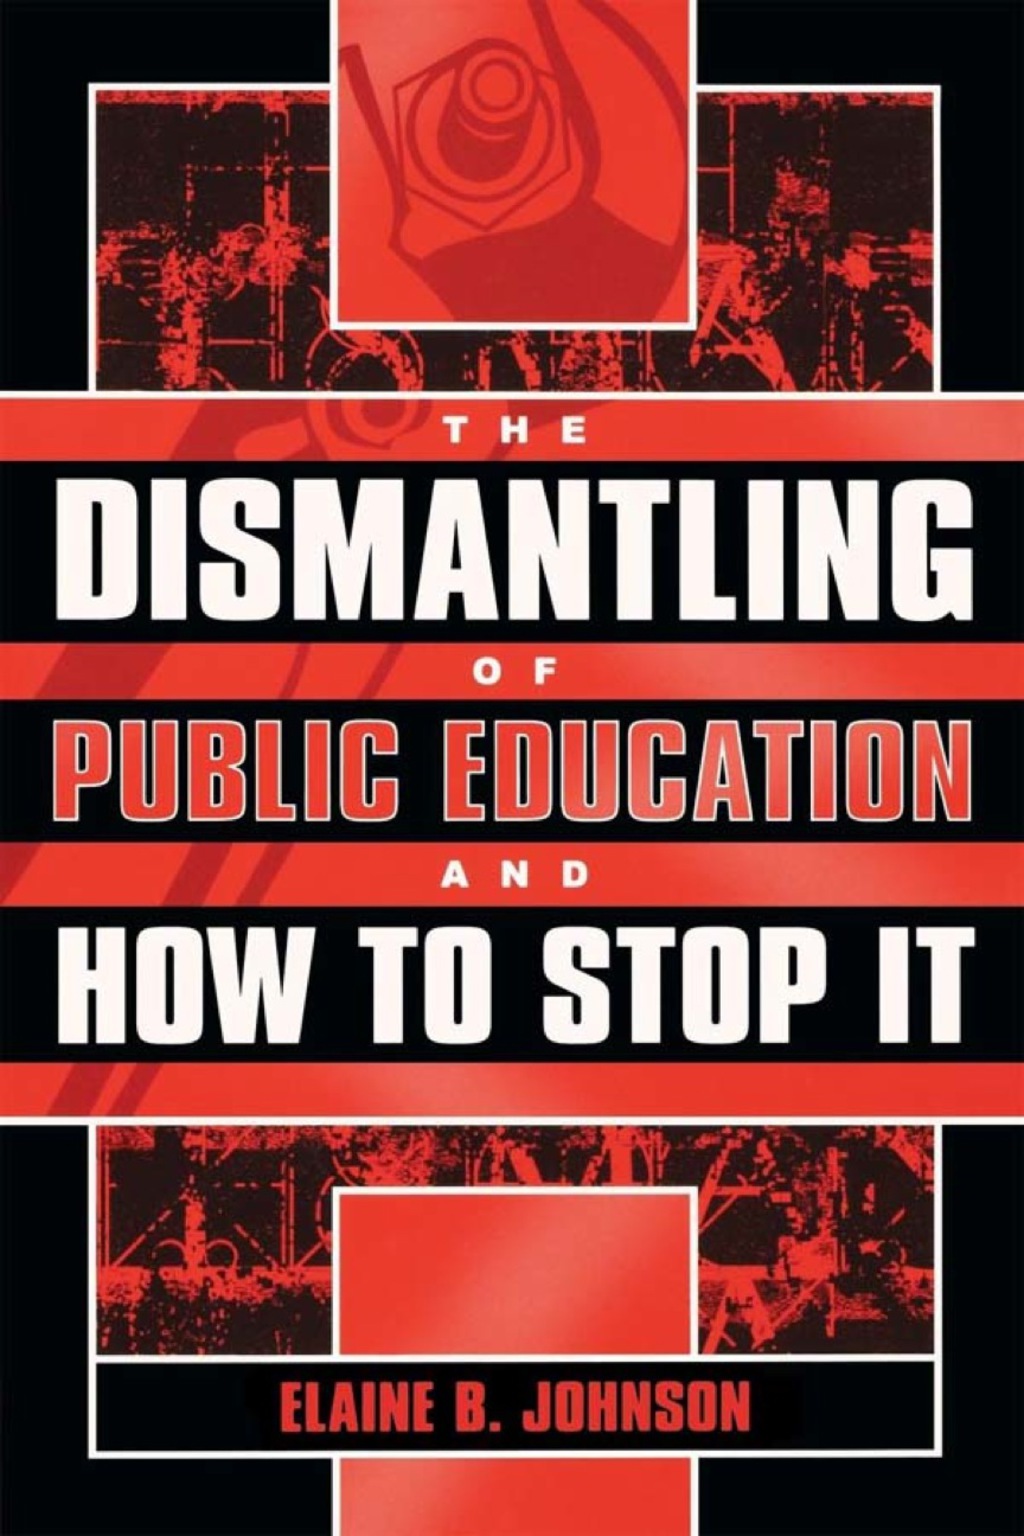 The Dismantling of Public Education and How to Stop It (eBook Rental) - Elaine B. Johnson,